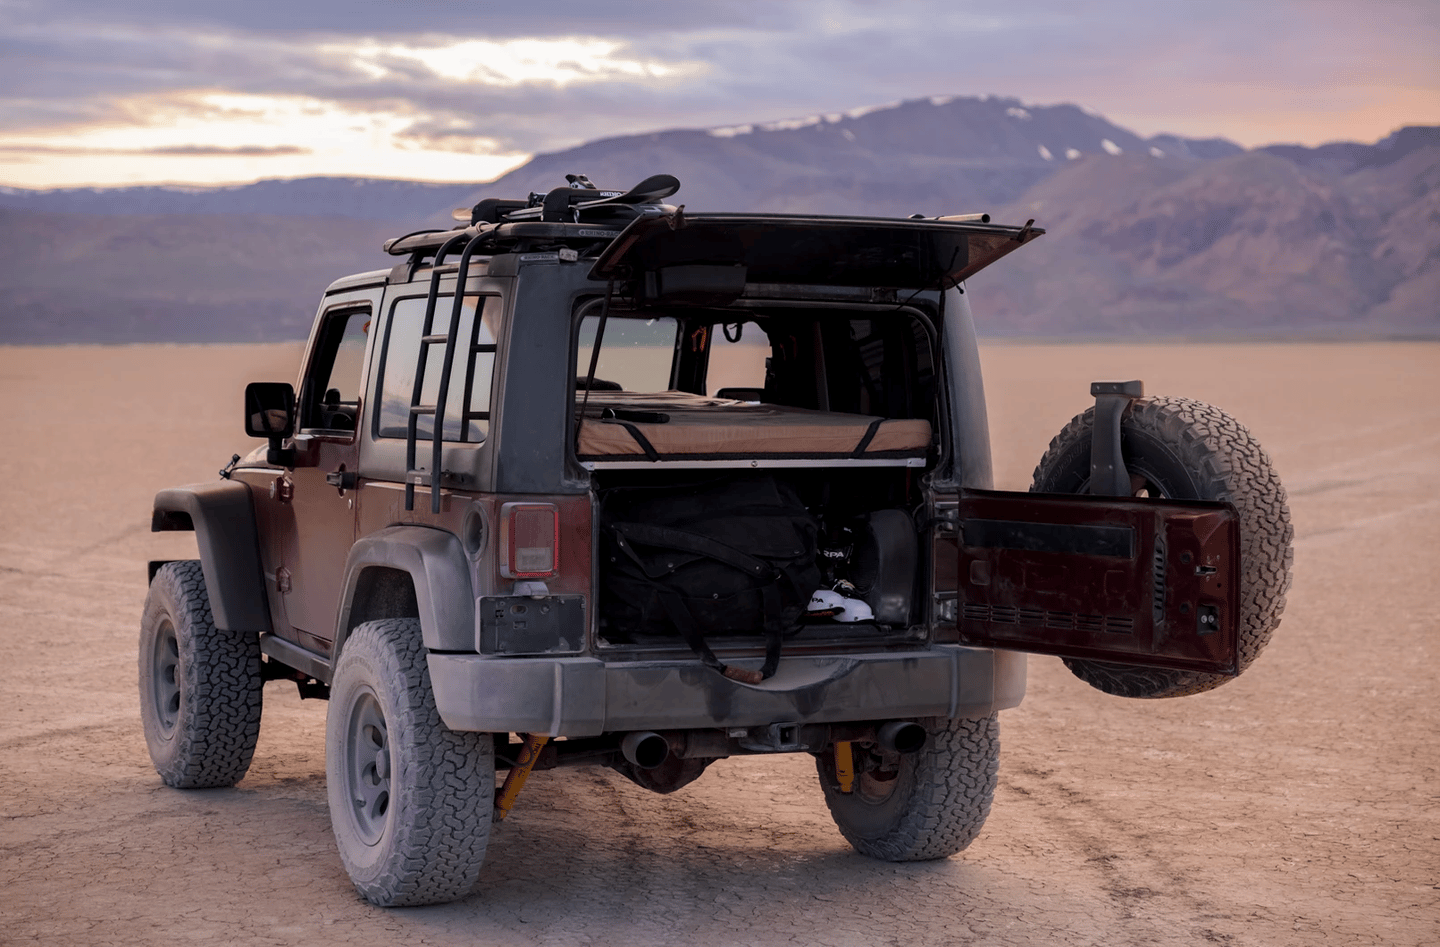 The Oryx Platform makes the two-door Jeep Wrangler a light, neatly packaged go/sleep-anywhere adventure rig